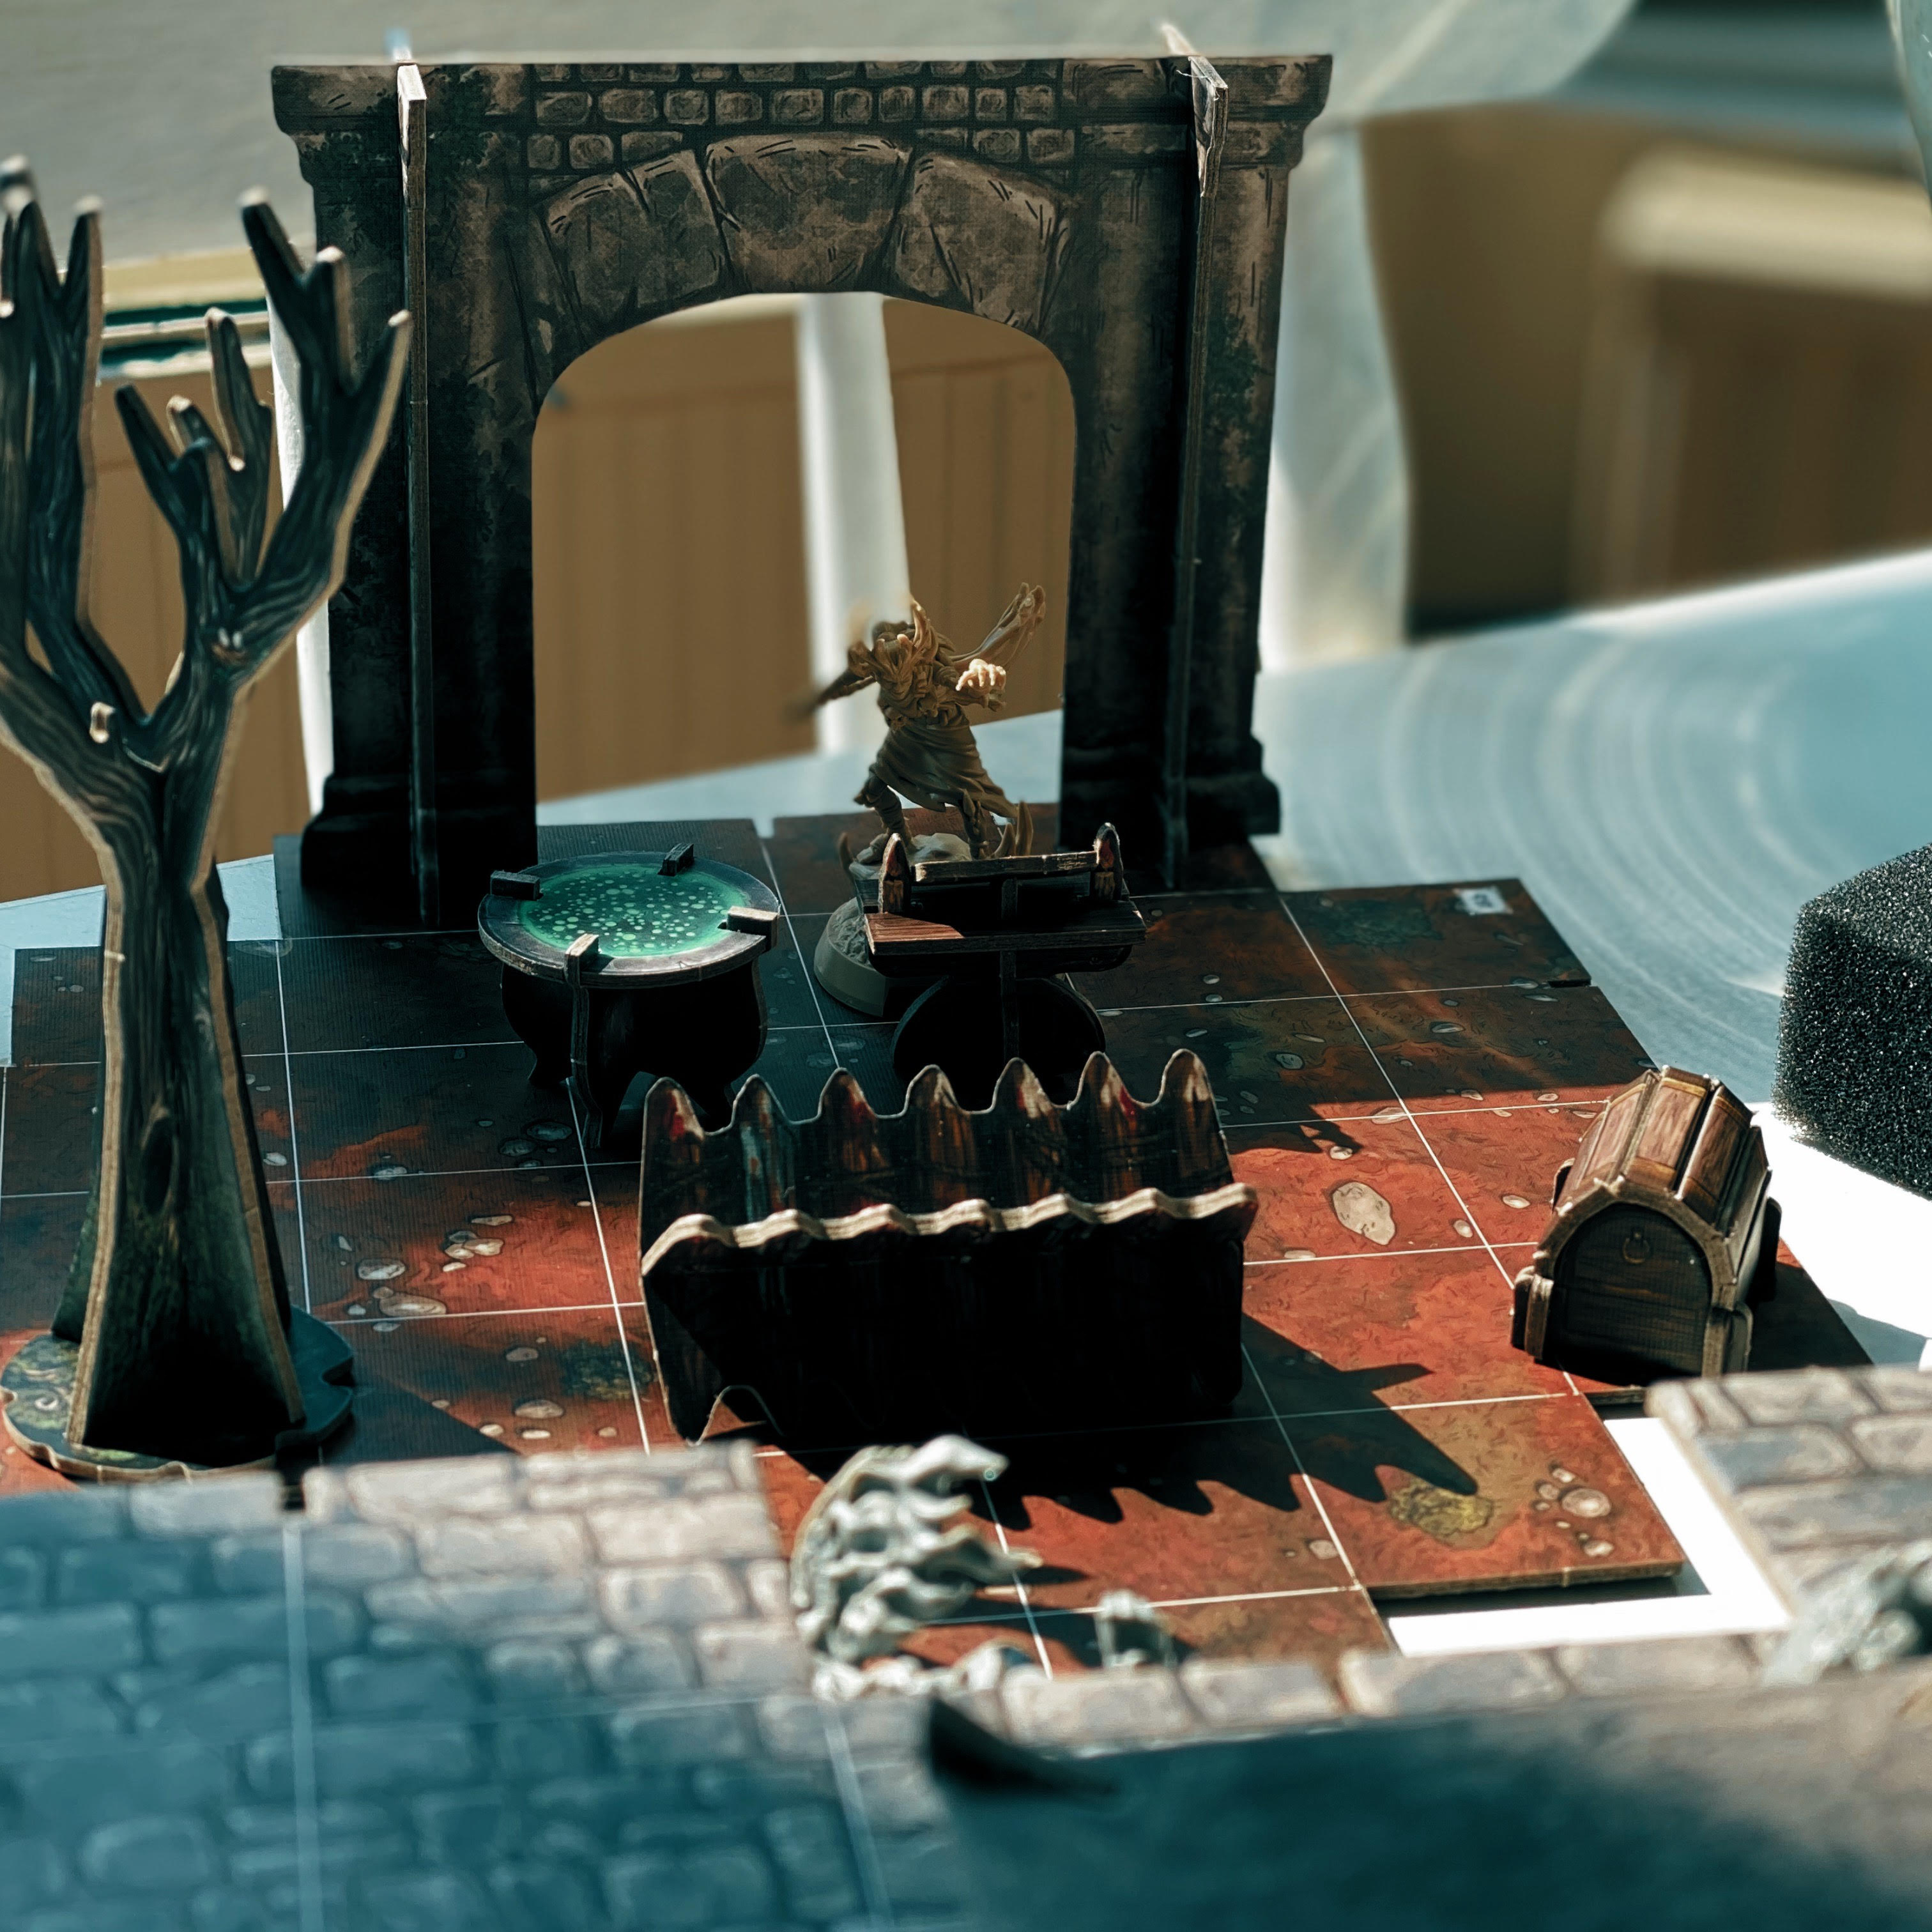 Photos of the Descent: Legends Of The Dark board game